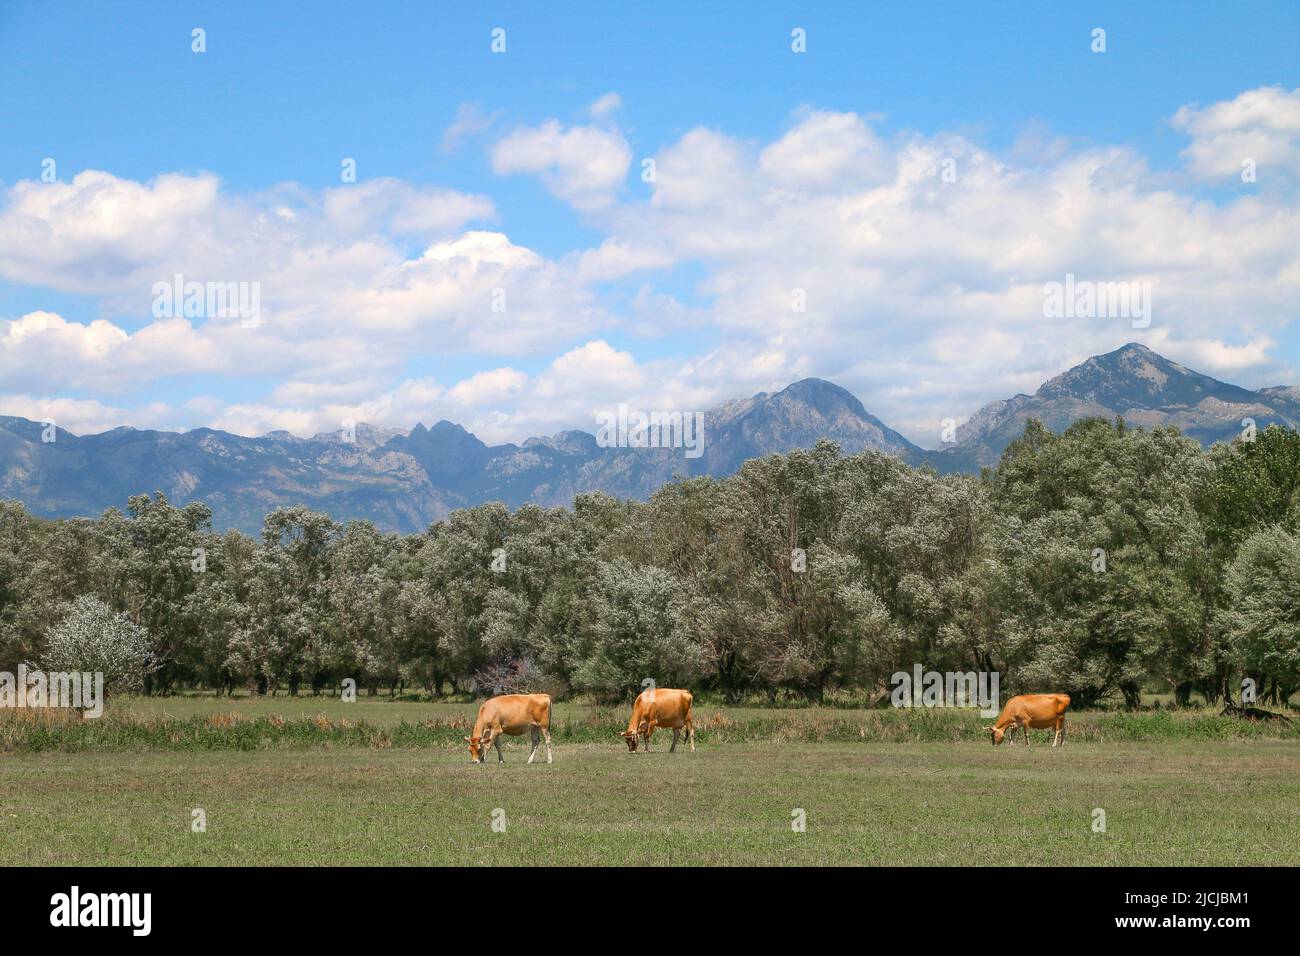 Lake Skadar, Albania - 28.07.2017: Three orange cows are grazing at the meadow near the Lake Skadar in Albania, with the green trees, blue mountains a Stock Photo